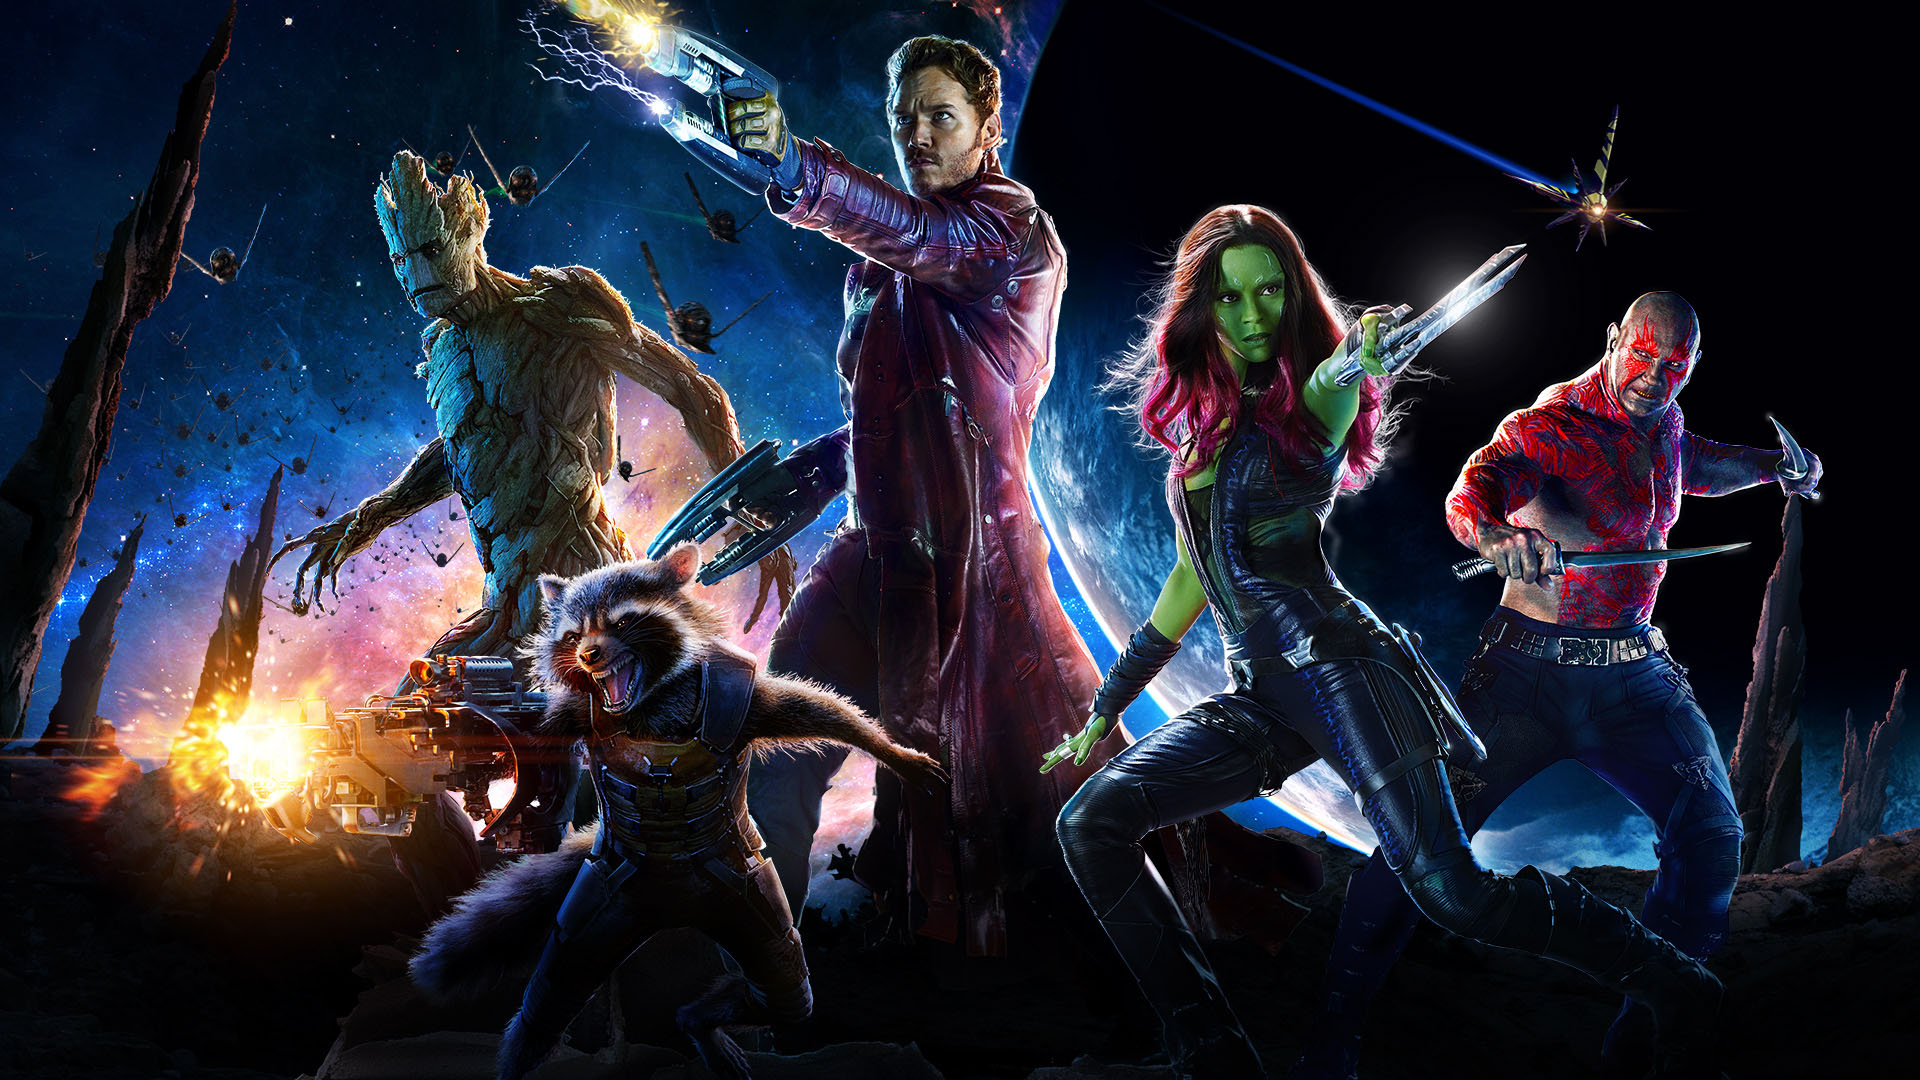 Guardians Of The Galaxy Movie Poster Full HD